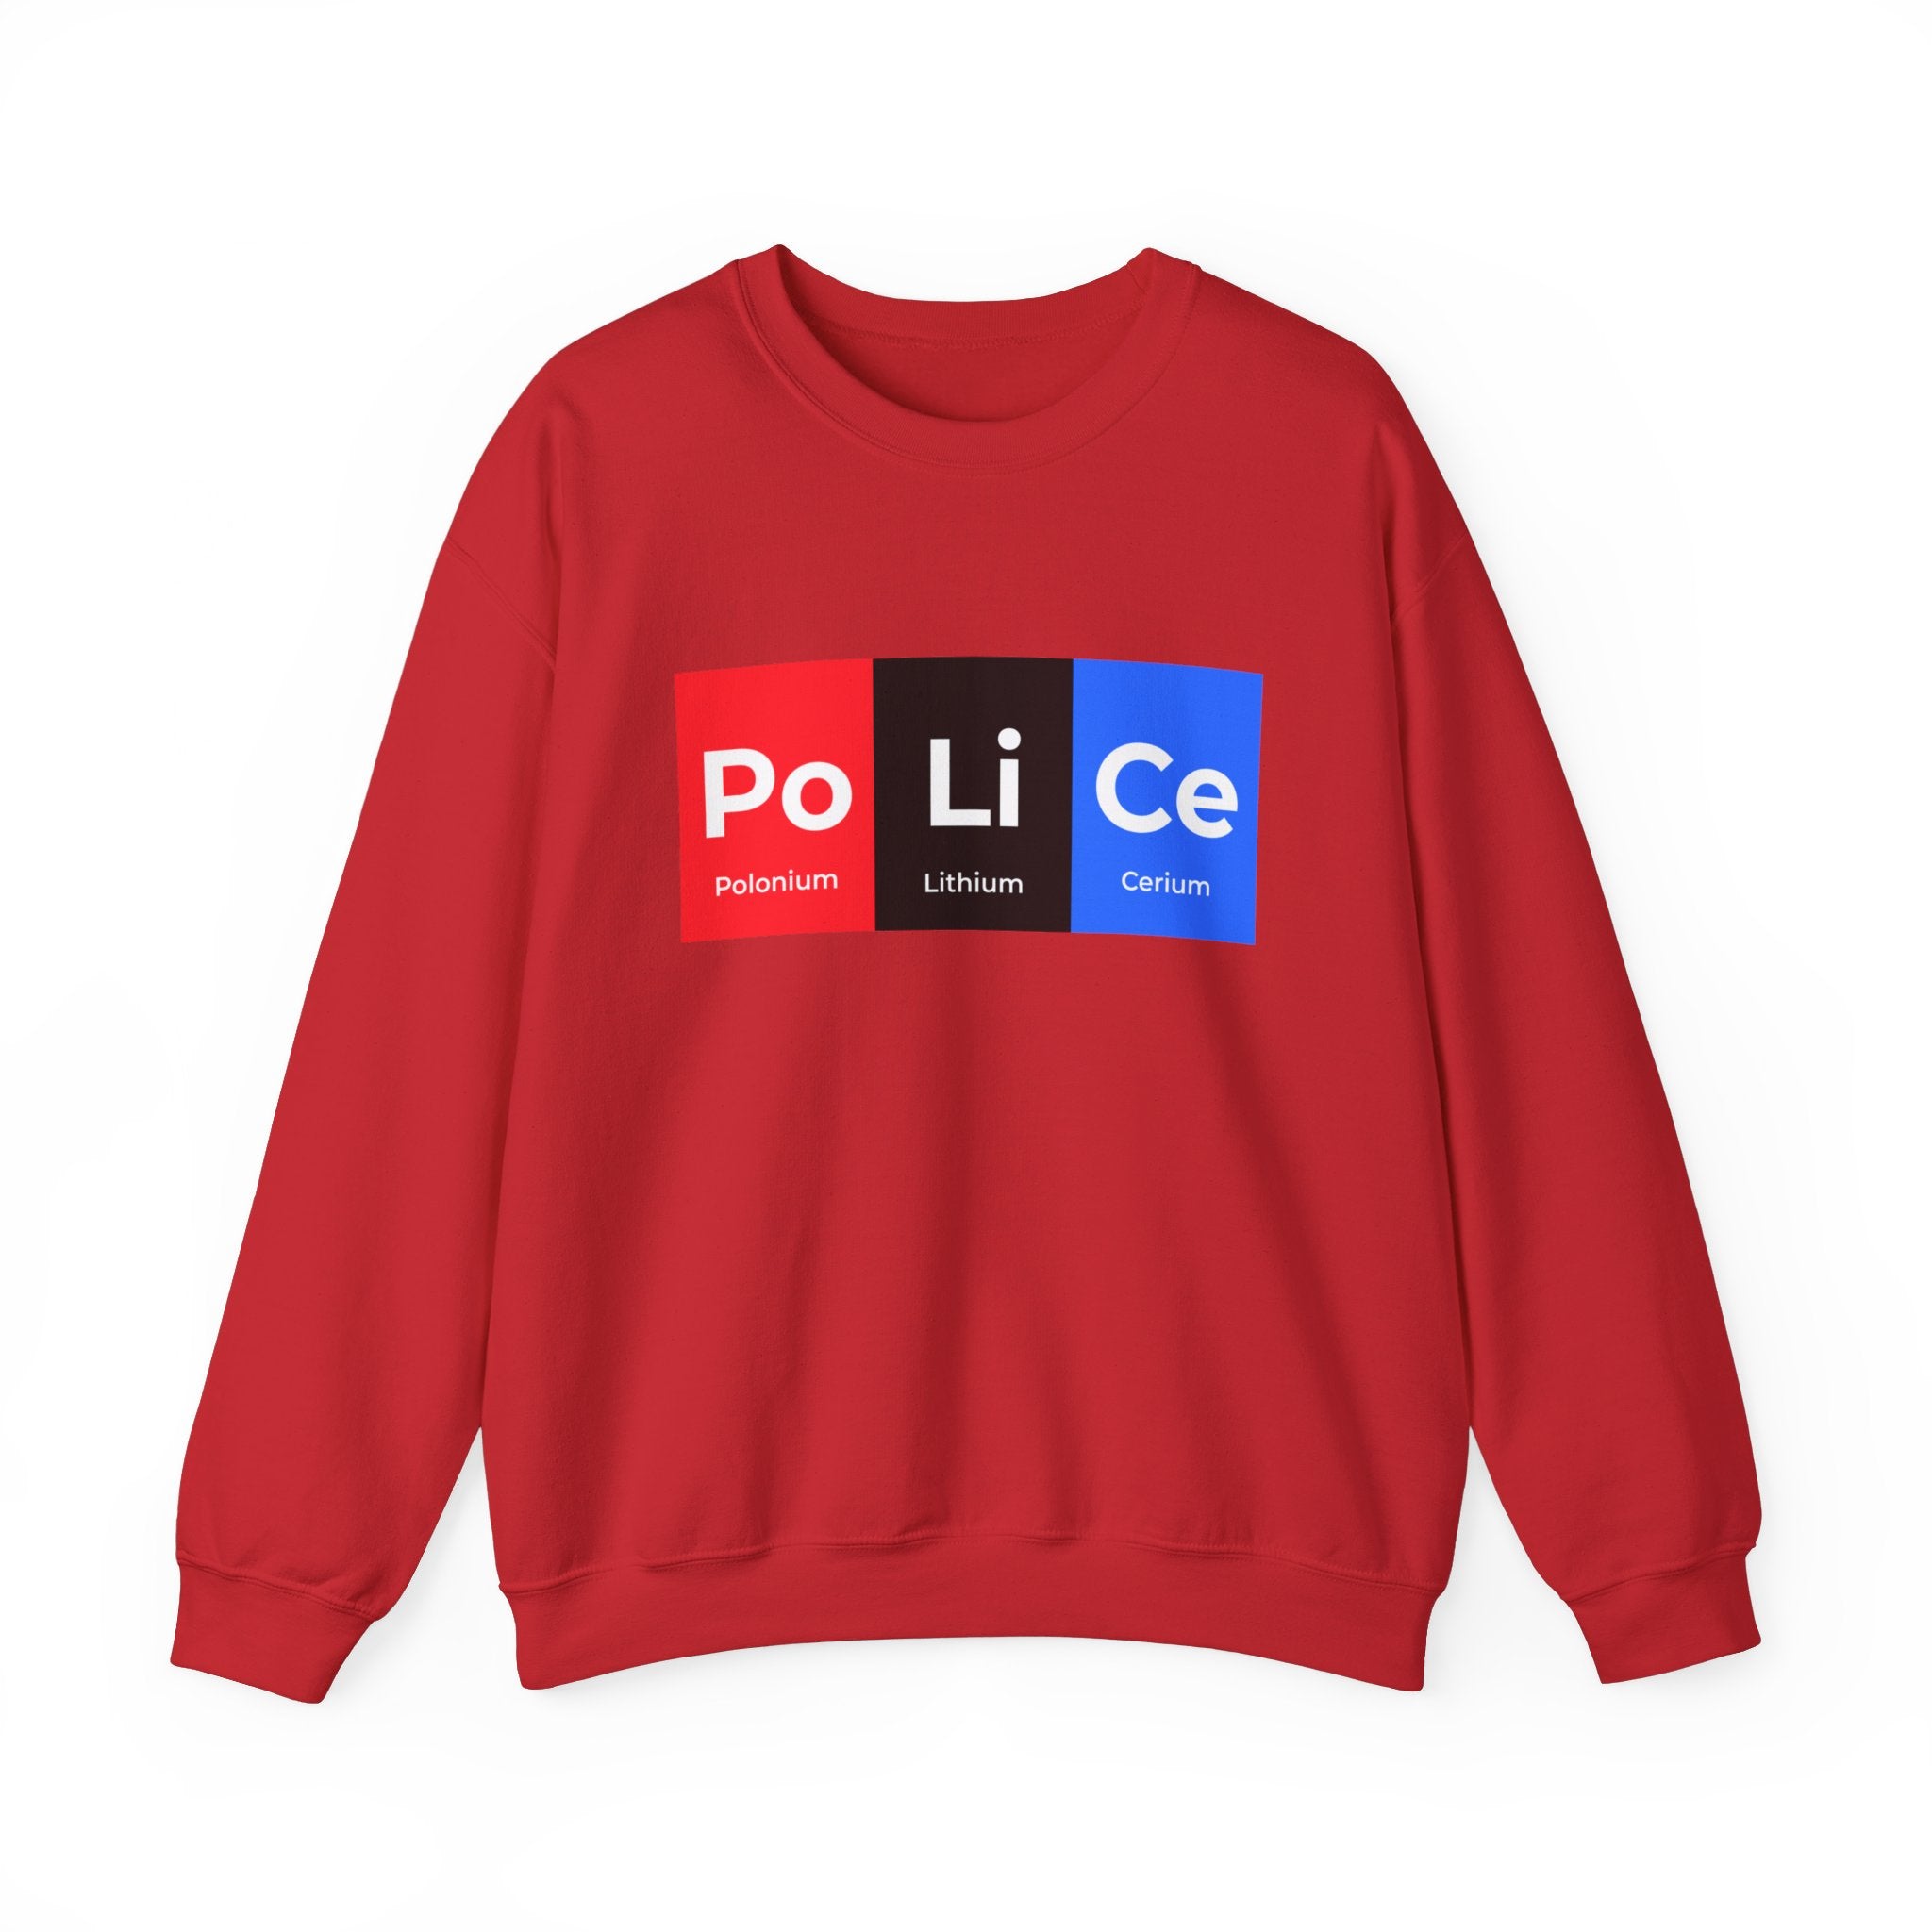 A Po-Li-Ce - Sweatshirt featuring a design spelling "Police" with chemical elements: Polonium (Po), Lithium (Li), and Cerium (Ce) on a black, red, and blue background, blending comfort with style.